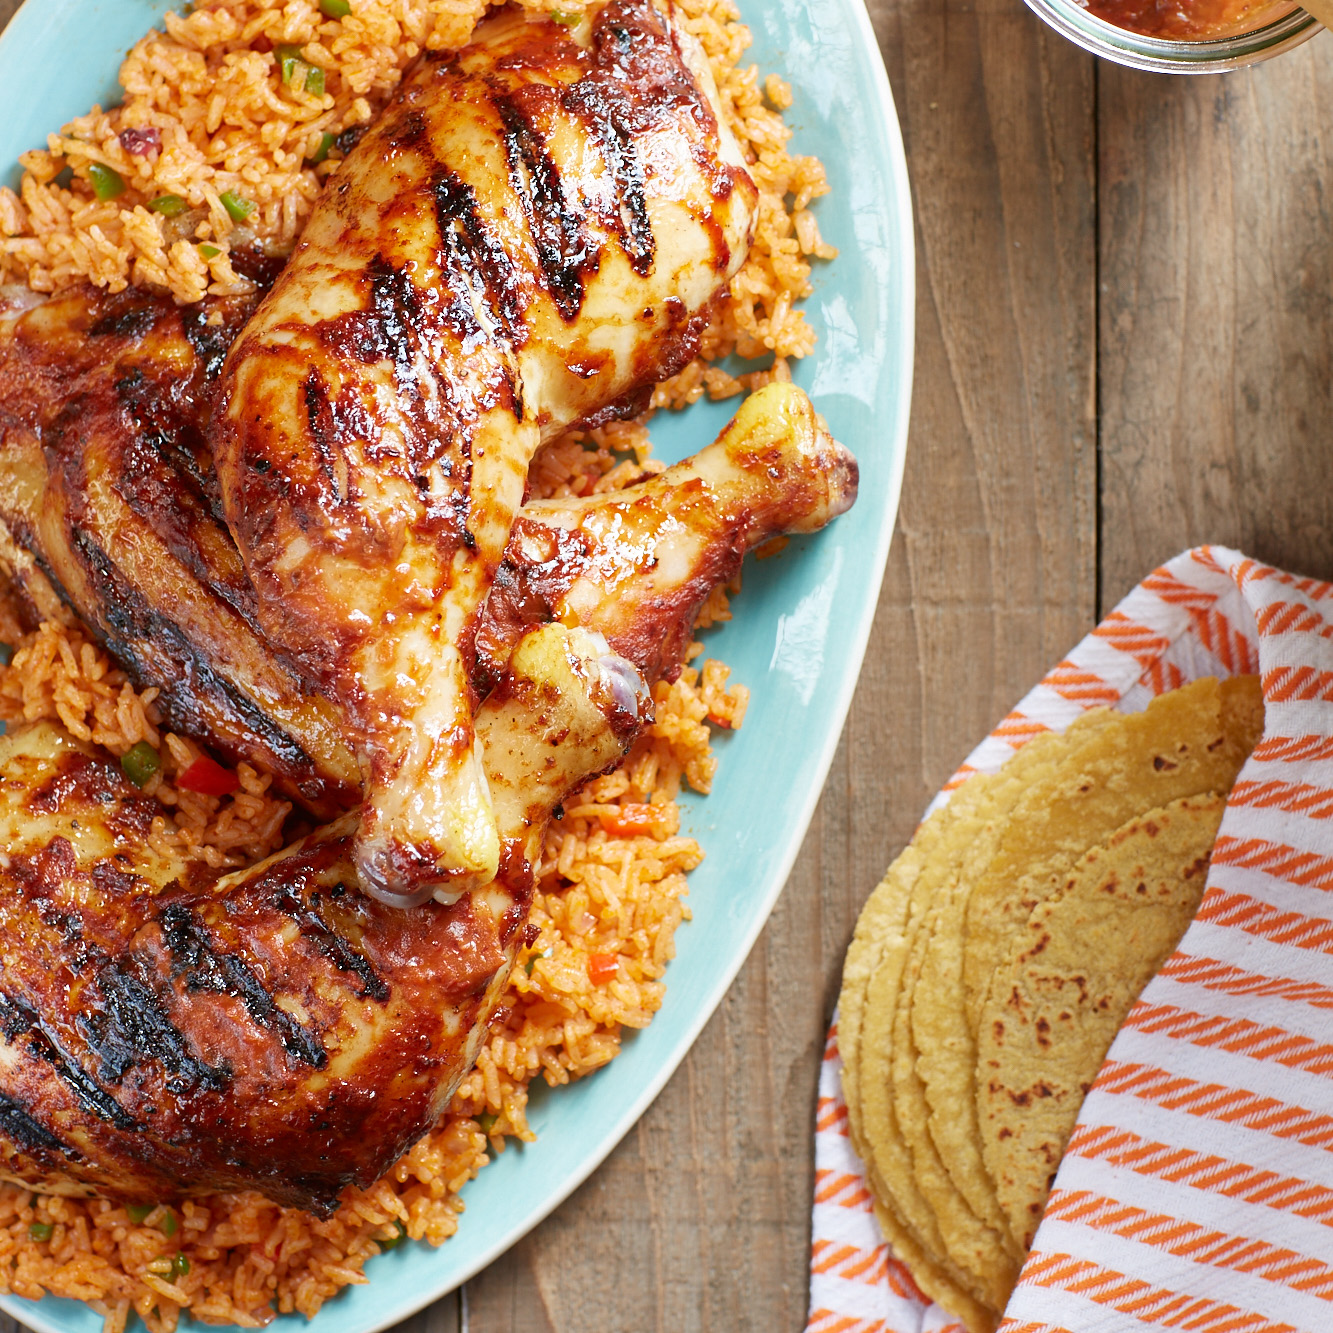 Grilled Chicken with Chipotle Barbecue Sauce